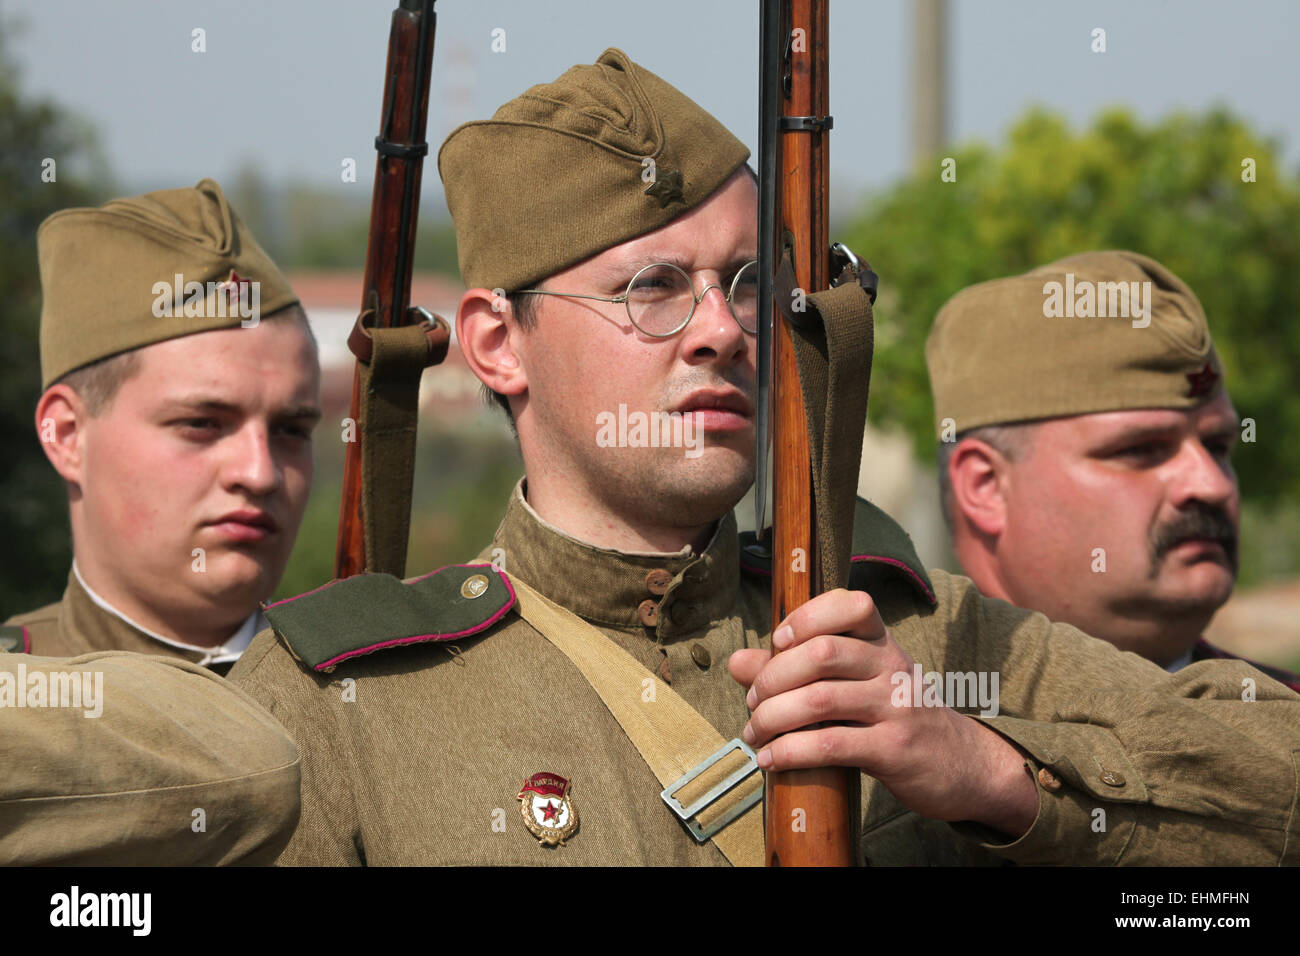 Re-enactors dressed as Soviet soldiers attend the re-enactment of the Battle at Orechov (1945) near Brno, Czech Republic. The Battle at Orechov in April 1945 was the biggest tank battle in the last days of the World War II in South Moravia, Czechoslovakia. Stock Photo